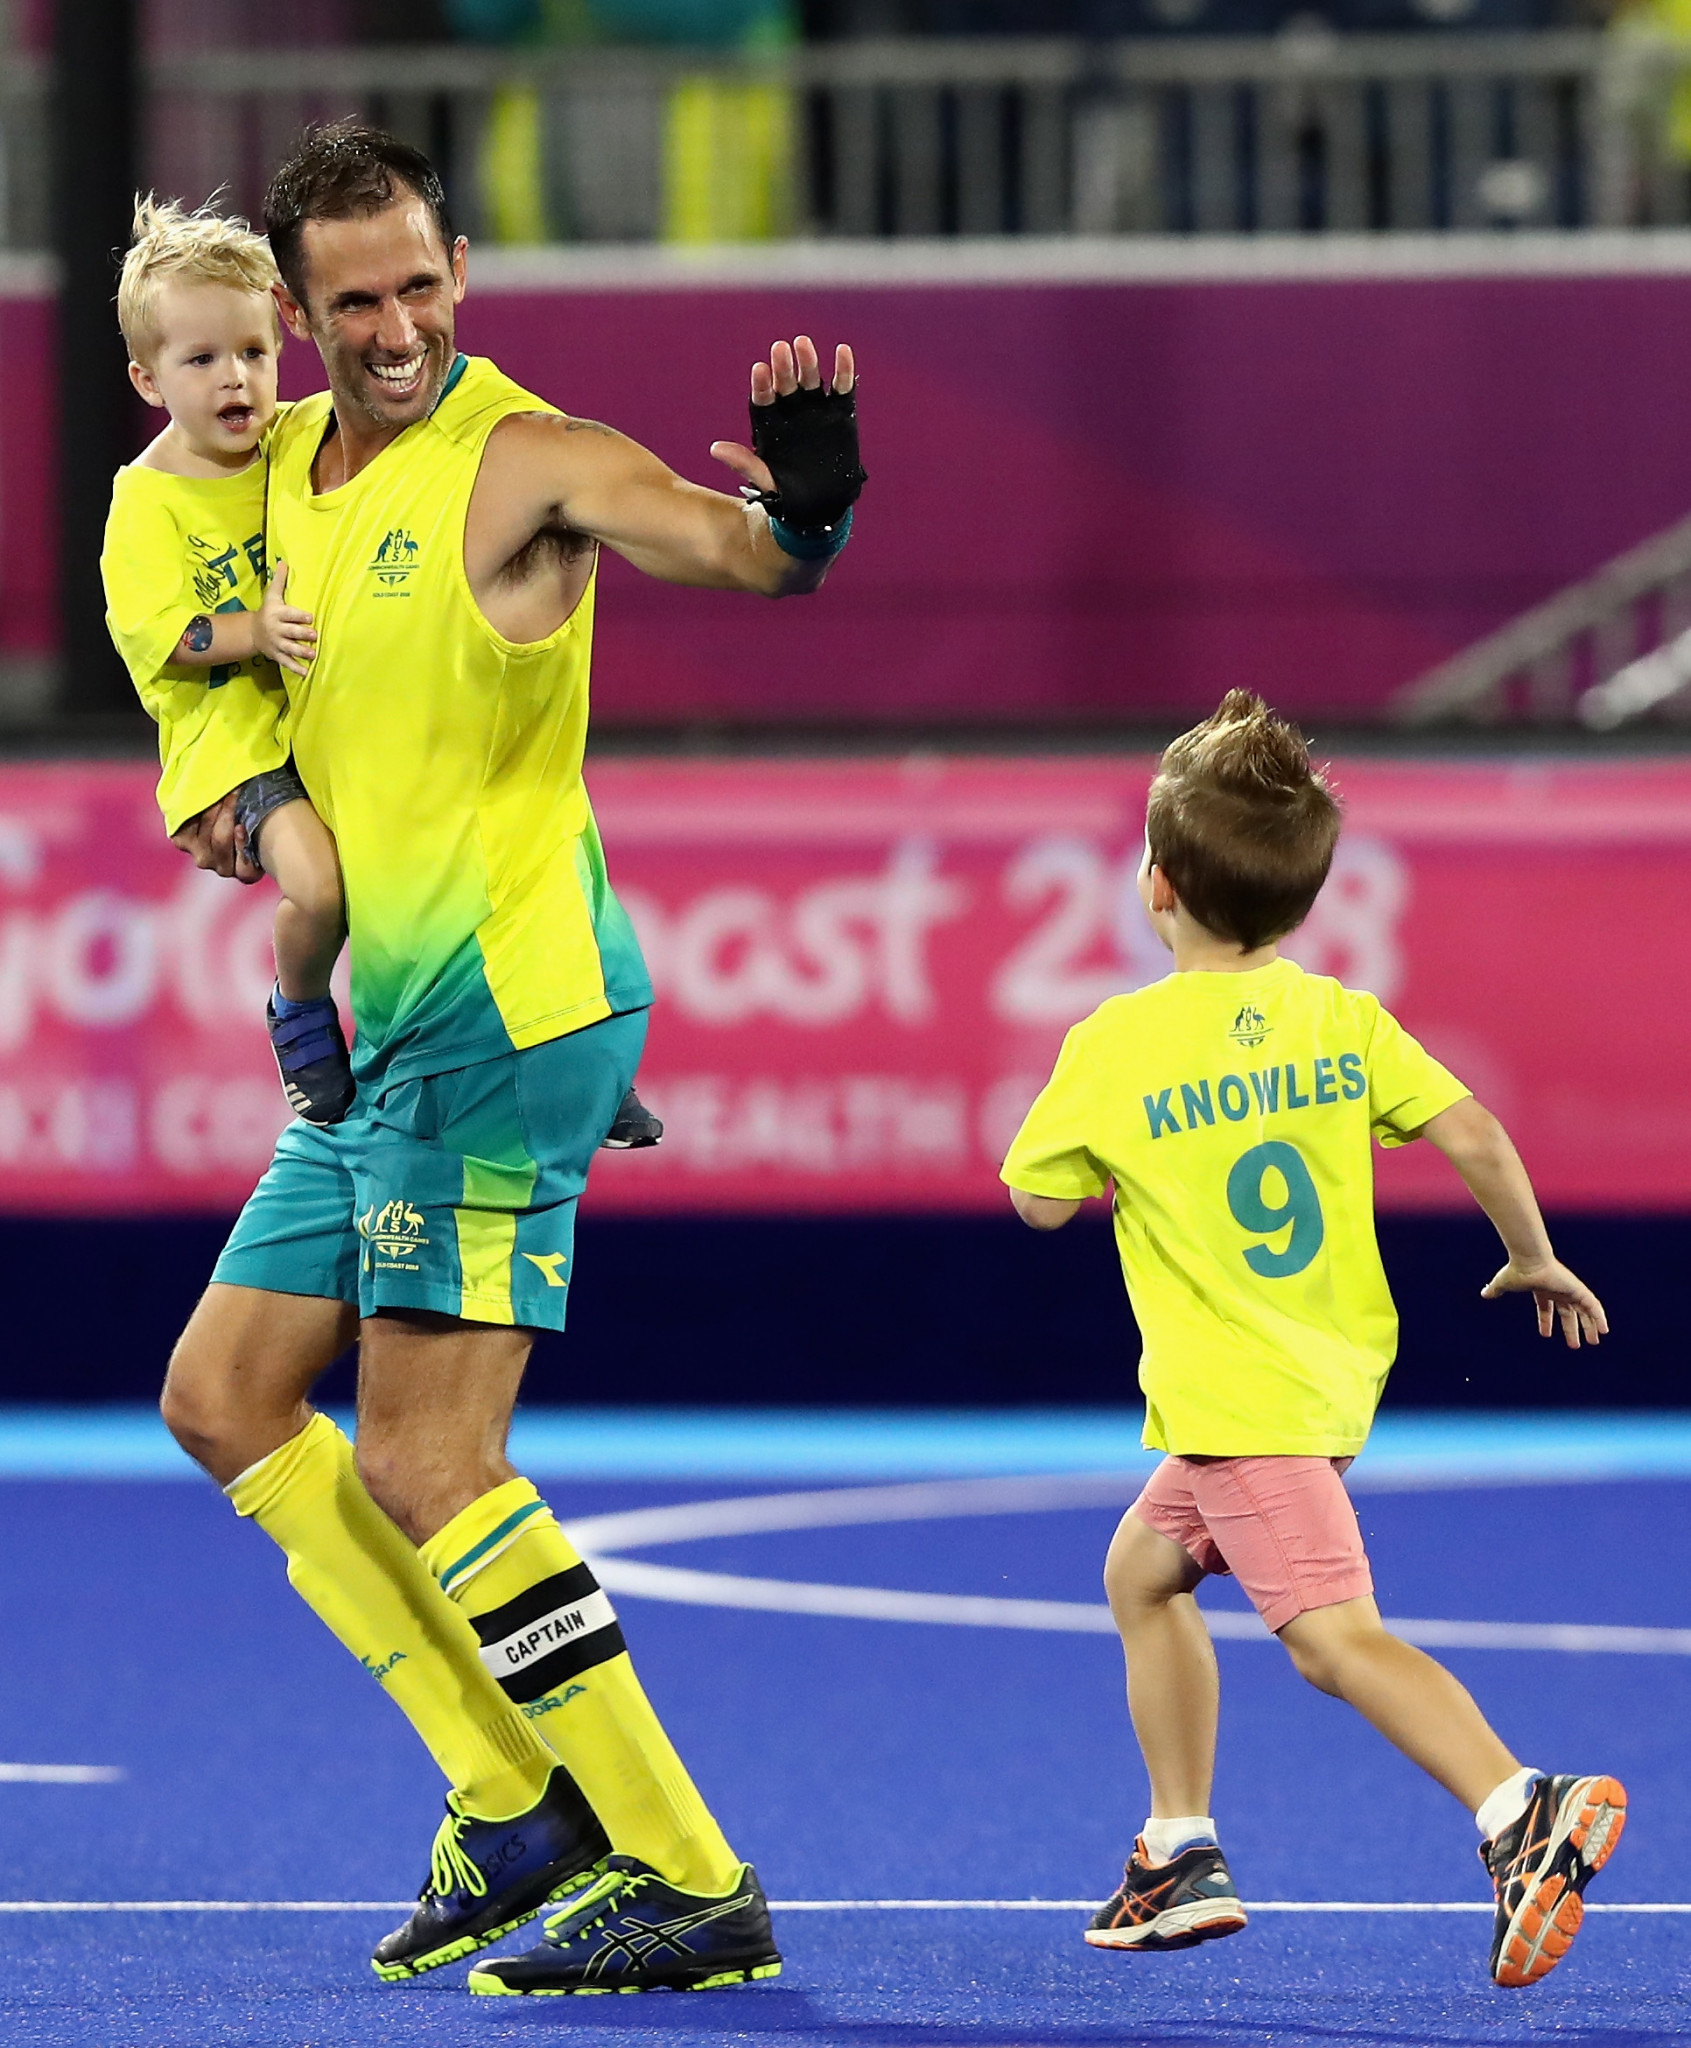 Keynote speakers include Mark Knowles, who ended his career earlier this month by captaining Australia to the men’s hockey title at the Gold Coast 2018 Commonwealth Games ©Getty Images